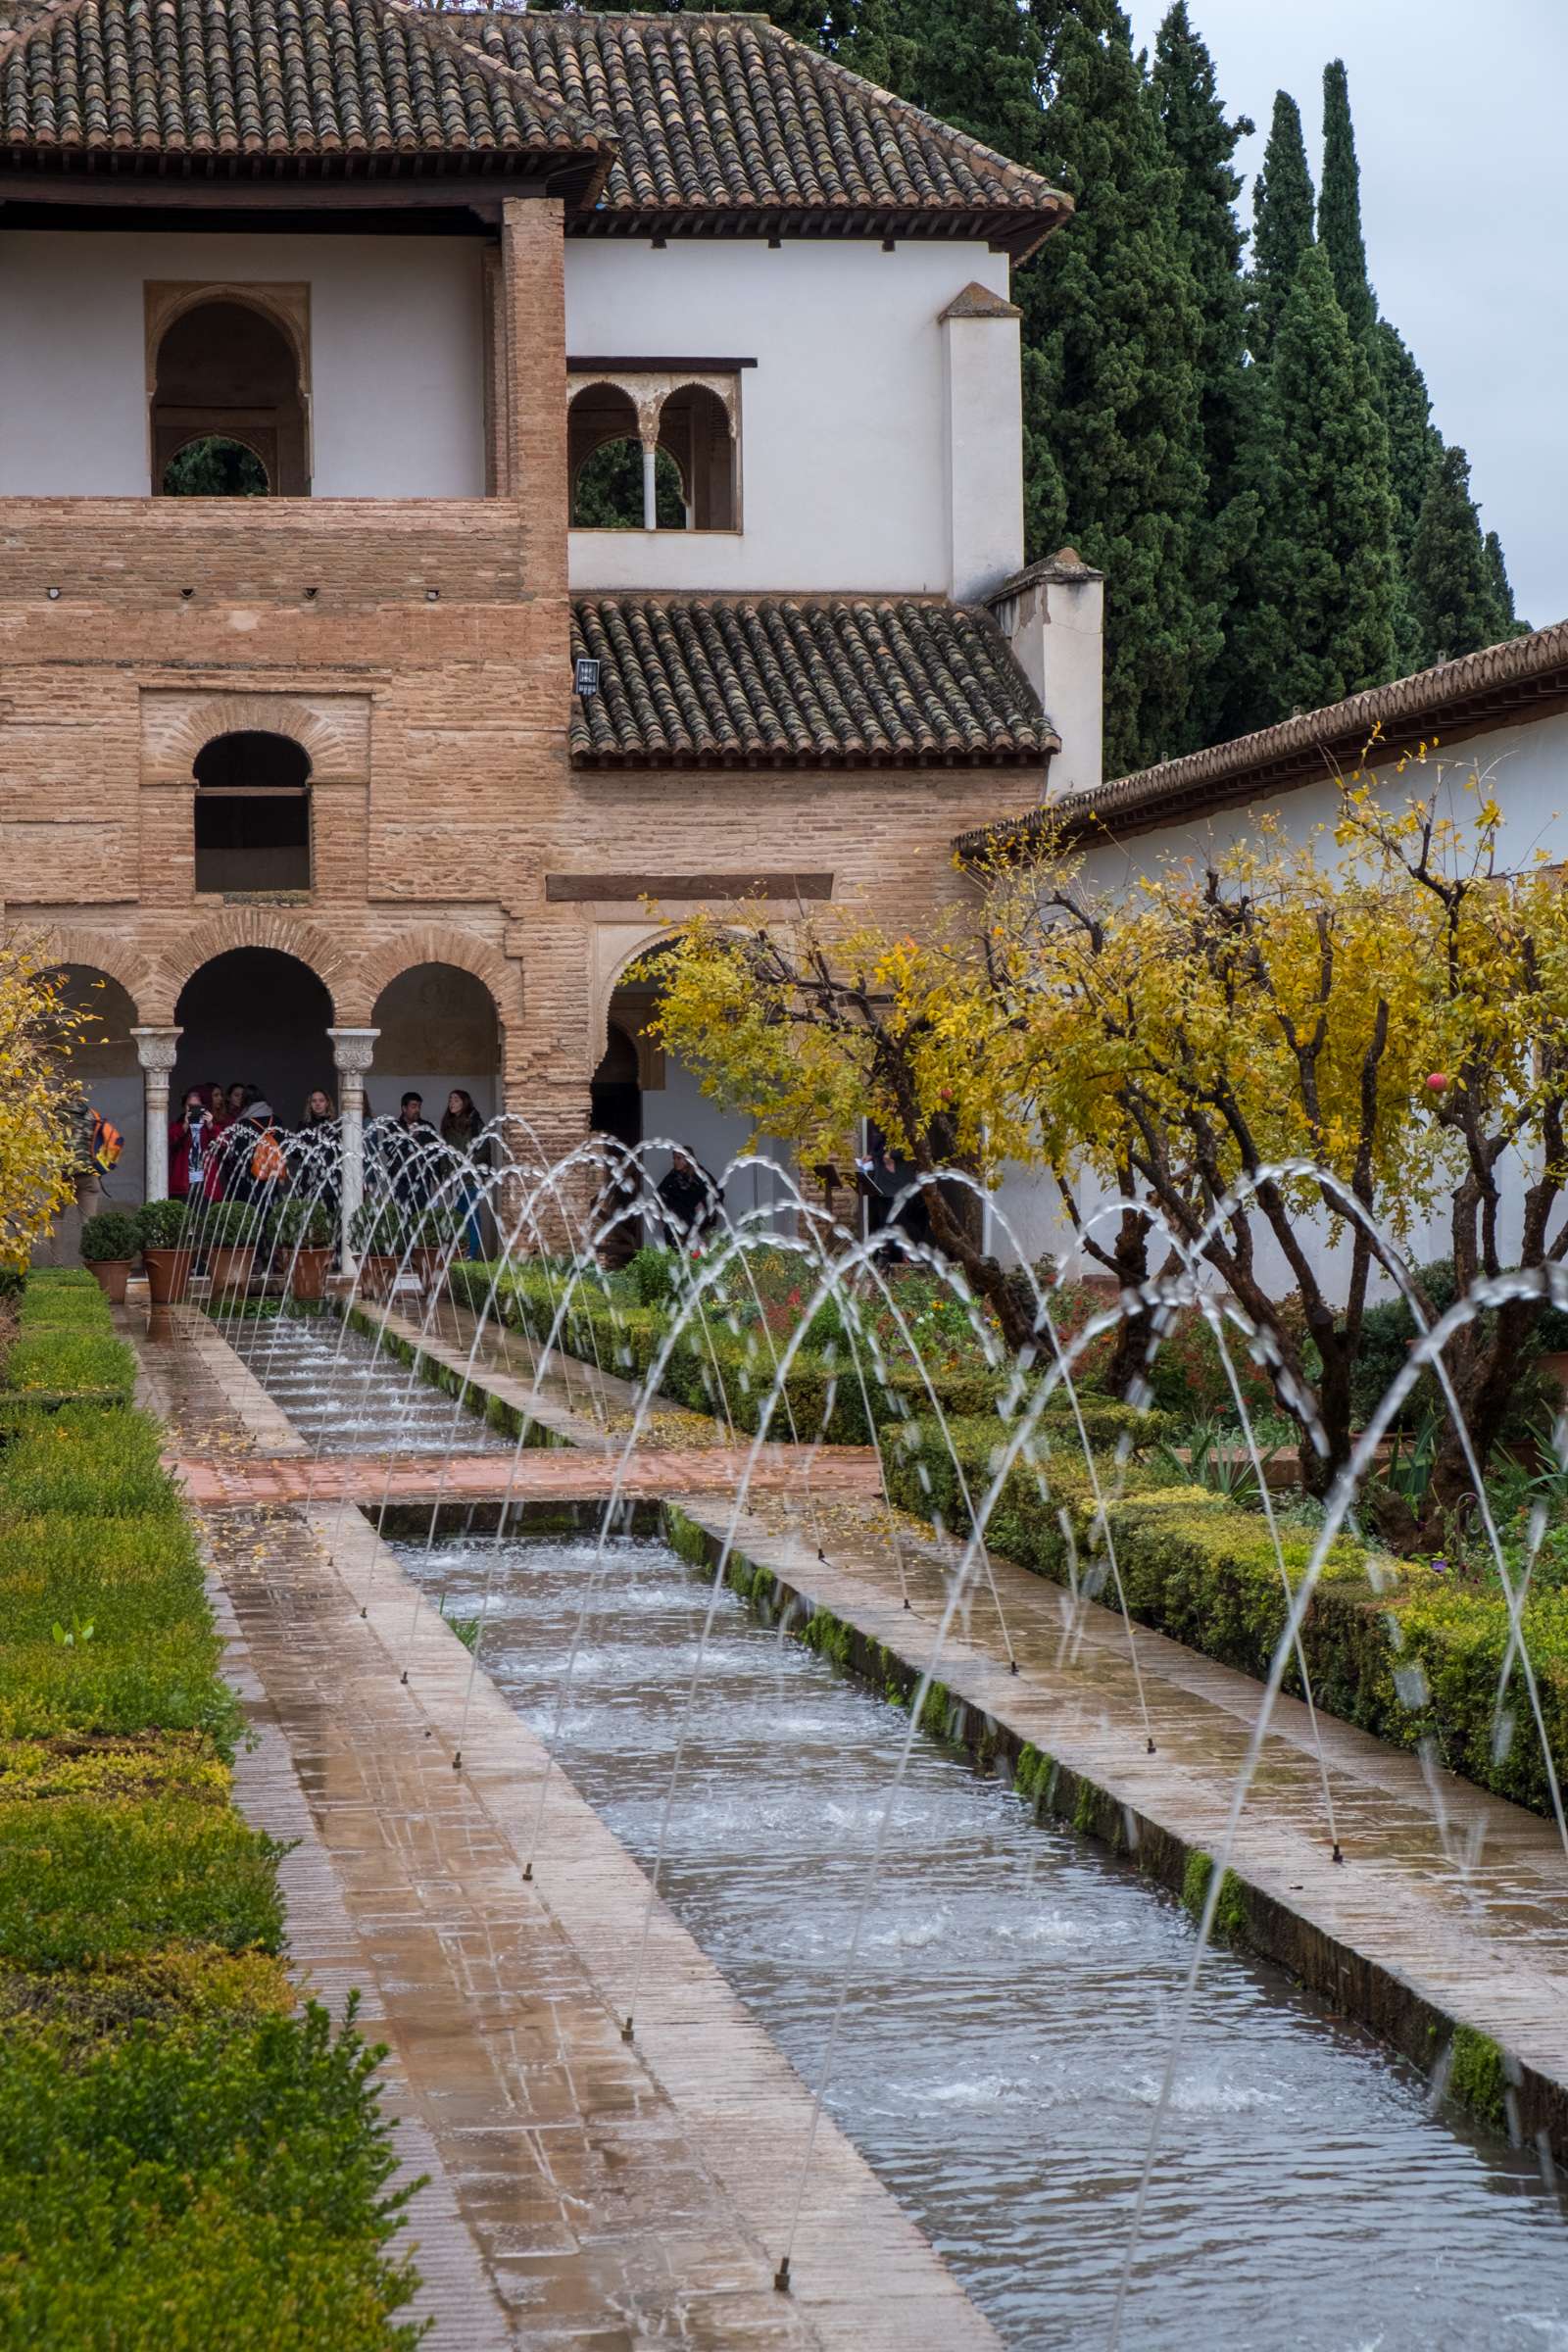 A pond and fountains in the garden of Generalife, The Alhambra, Granada